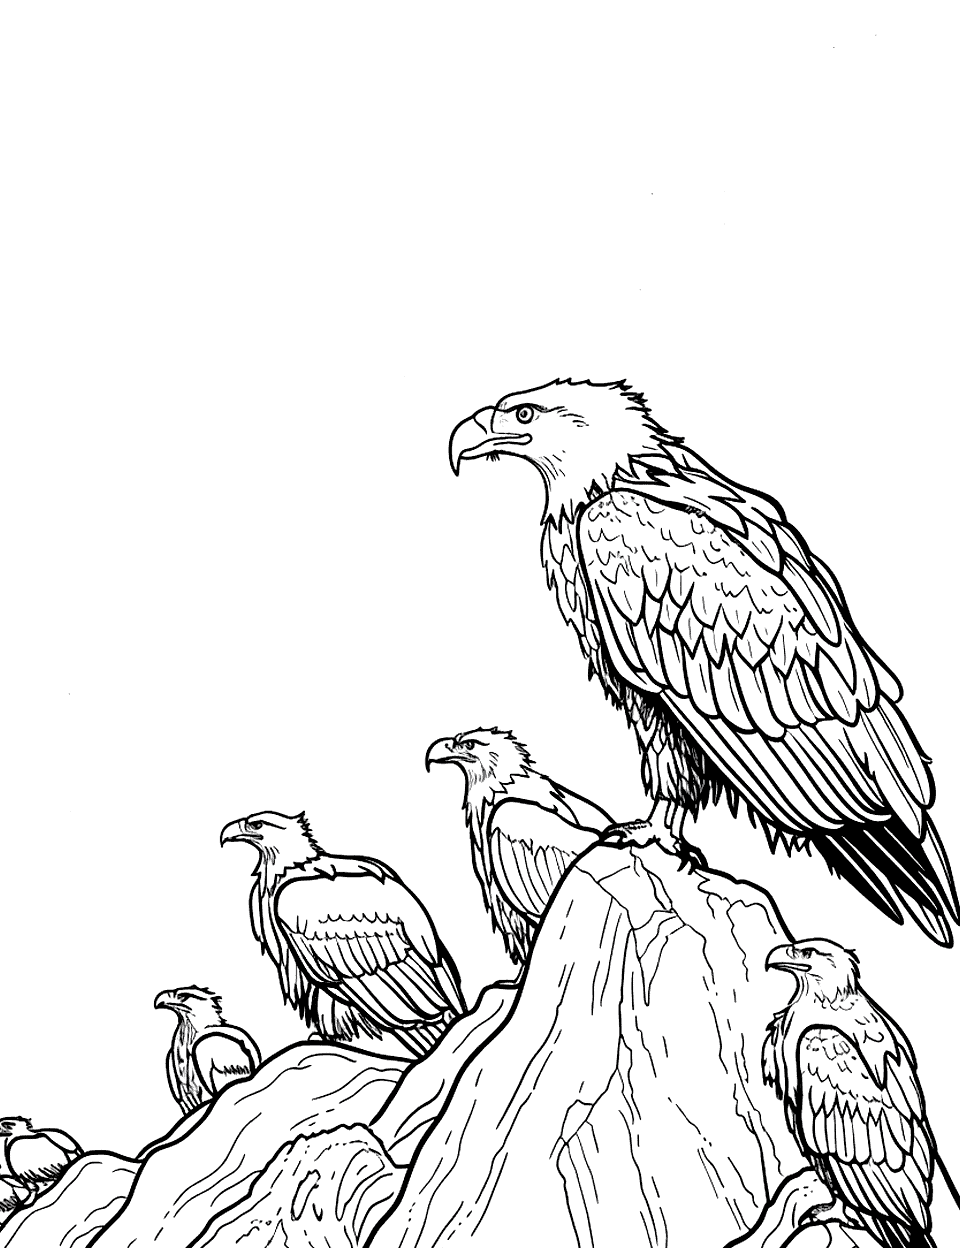 Eagle Preparing for Migration Coloring Page - A group of eagles gather on a rocky outcrop, readying themselves for the long journey ahead.